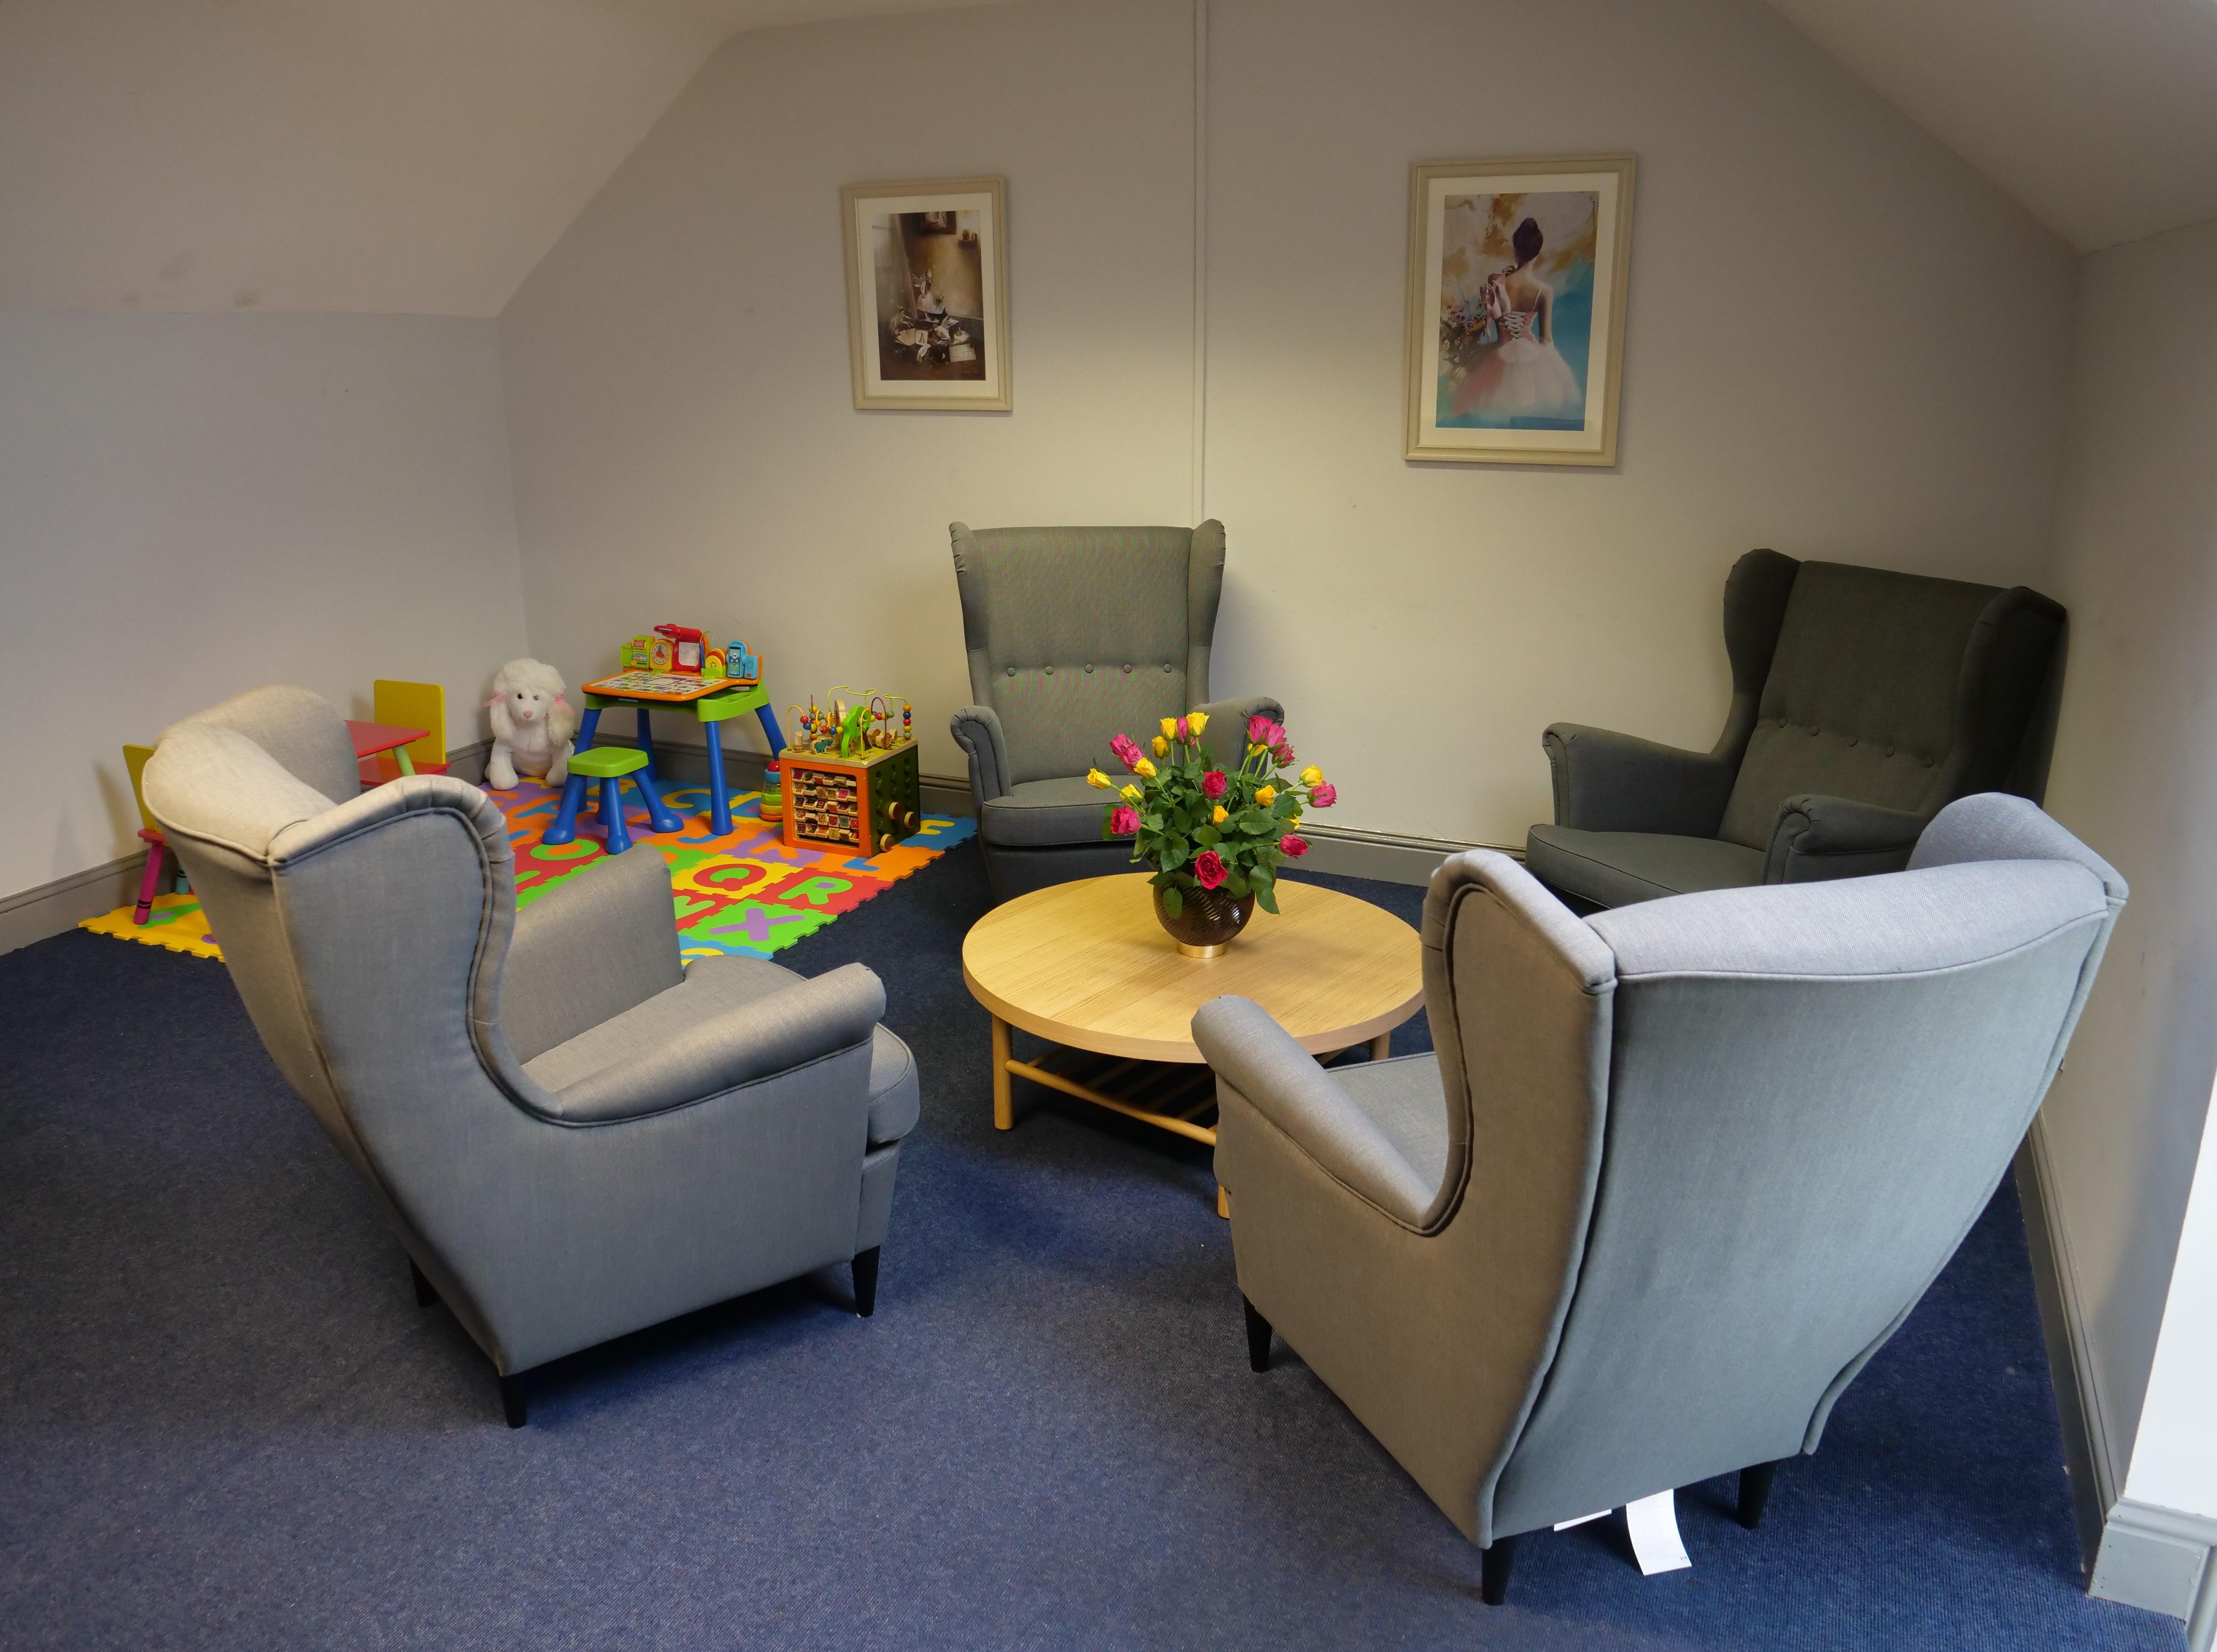 Welcome Rooms will have TVs, books, board games and other activities to relax with